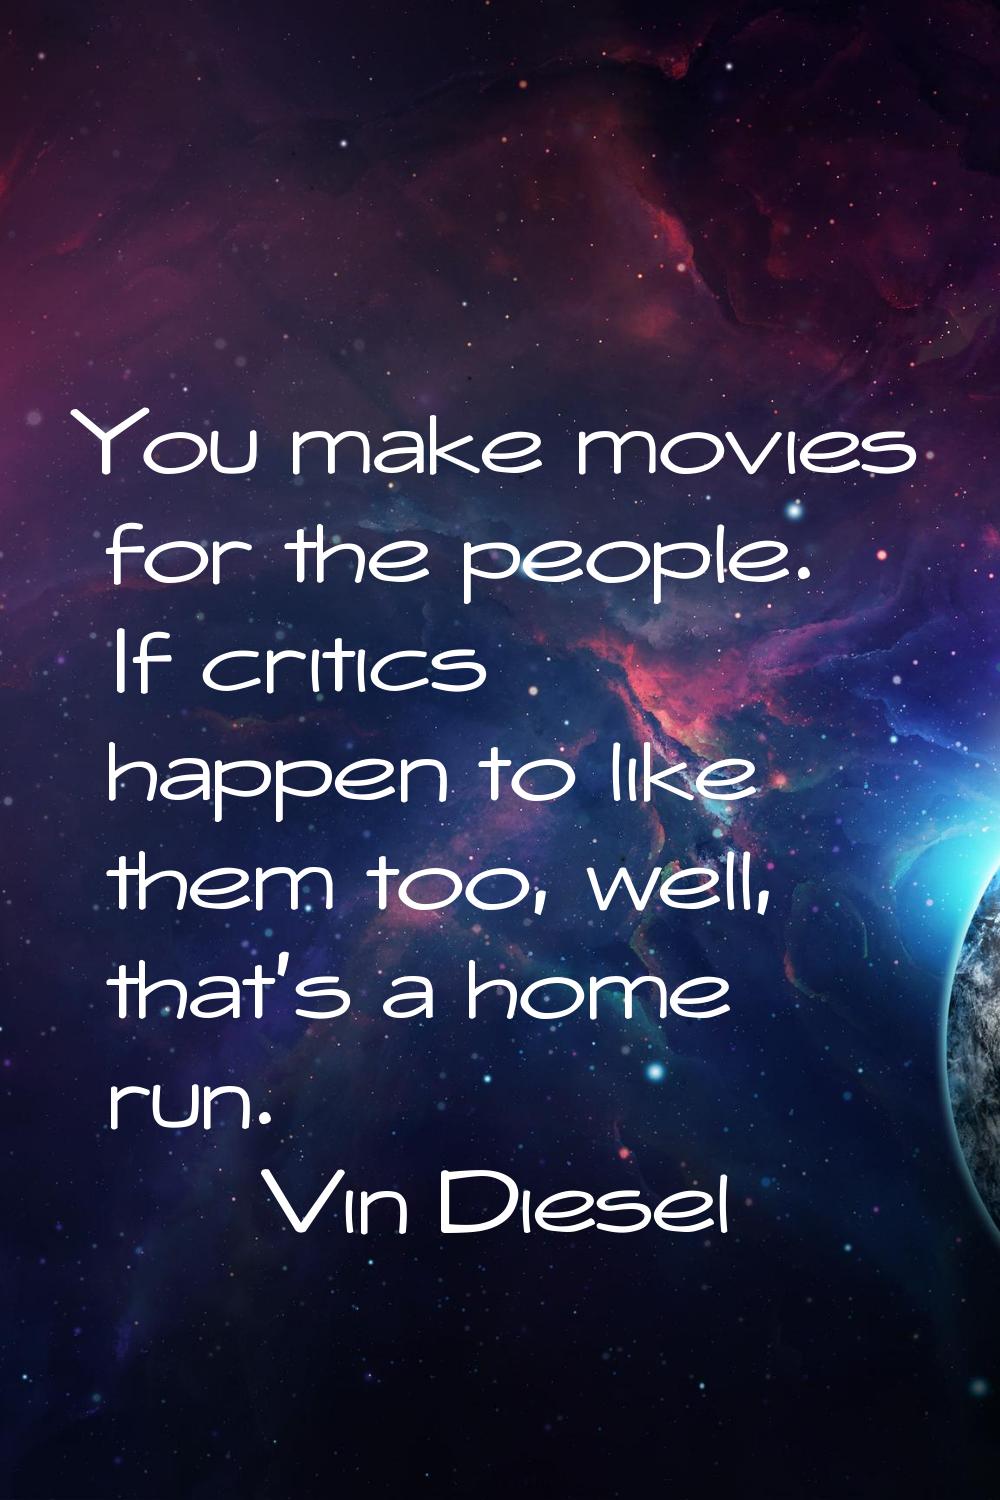 You make movies for the people. If critics happen to like them too, well, that's a home run.